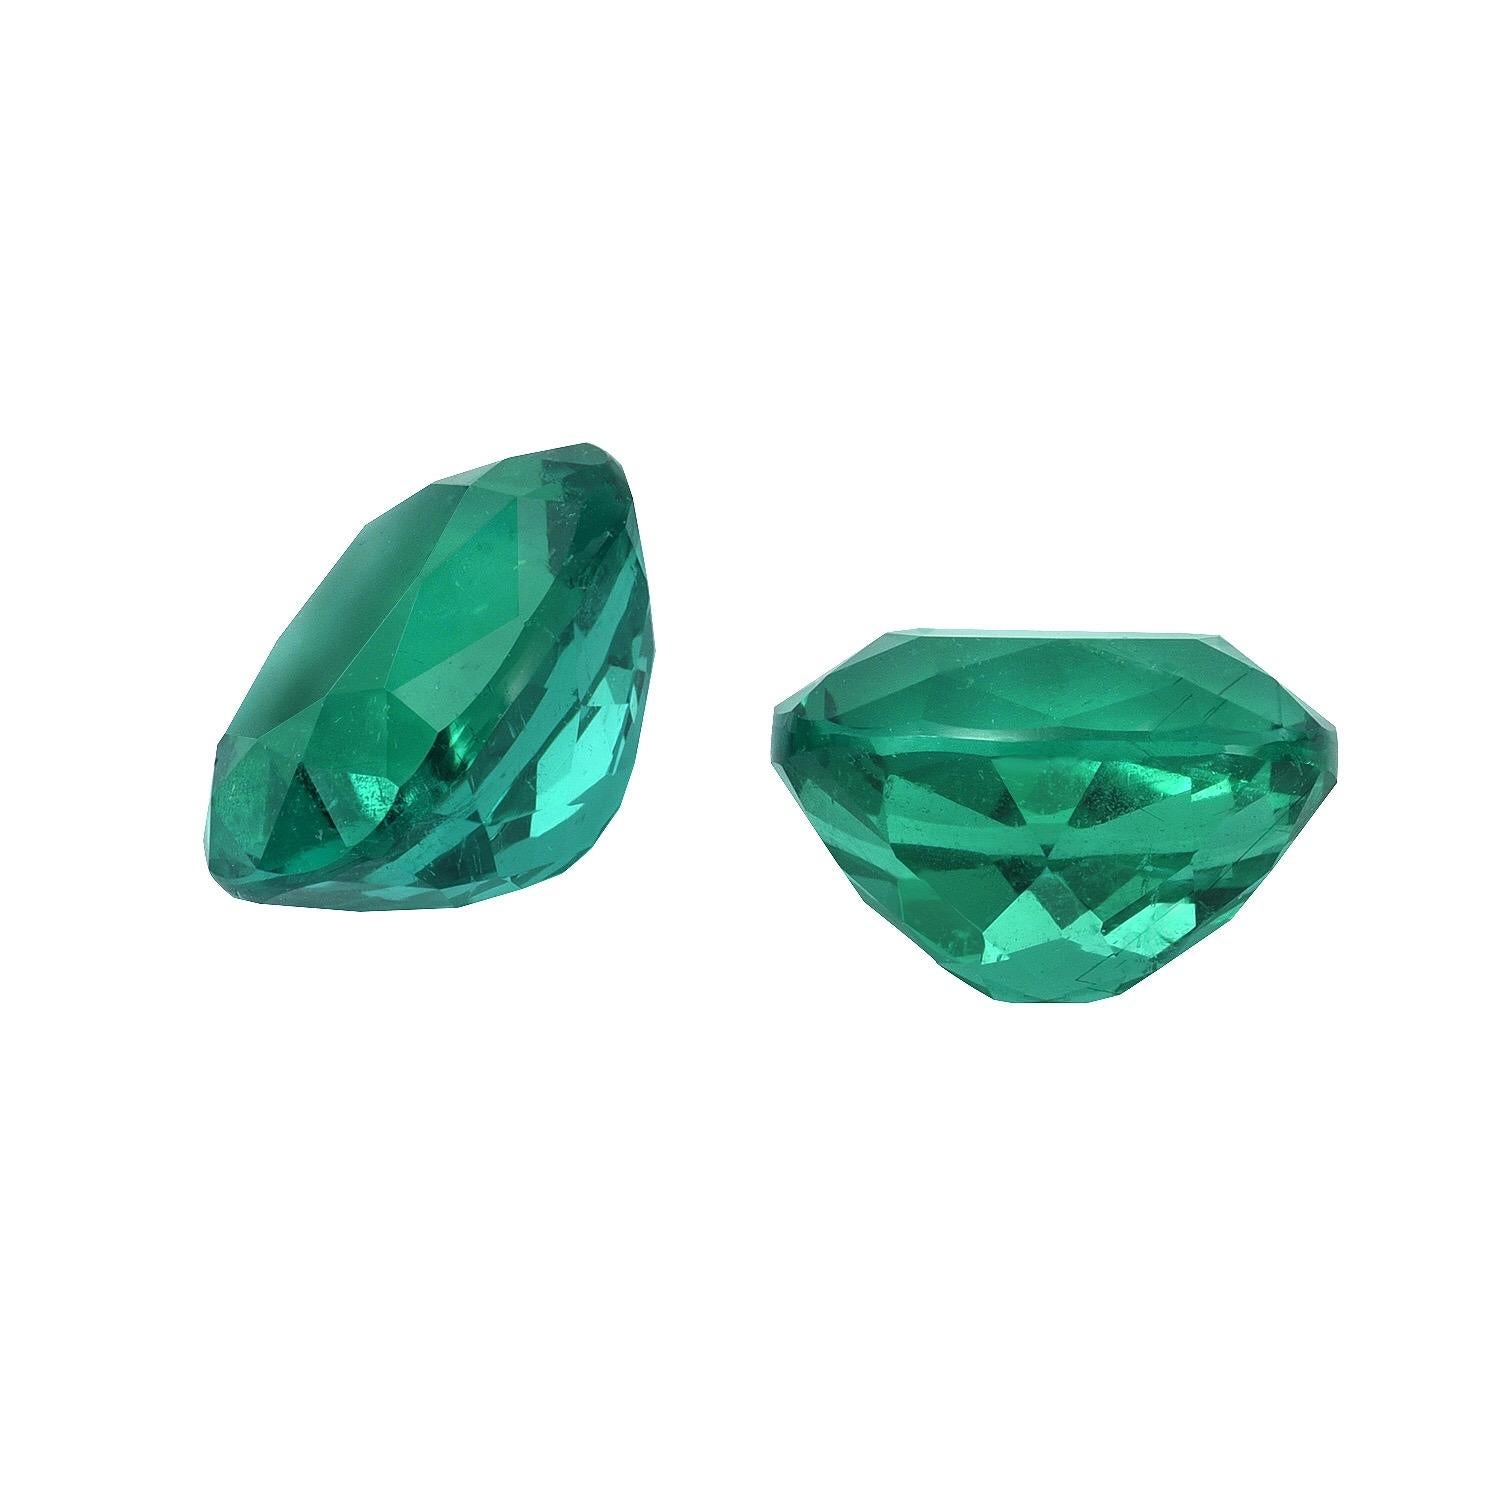 Luminous pair of Colombian Emerald earring gems, weighing a total of 3.11 carats, offered loose to a fine gemstone lover.
The G.I.A certificate is attached to the image selection for your reference.
Returns are accepted and paid by us within 7 days